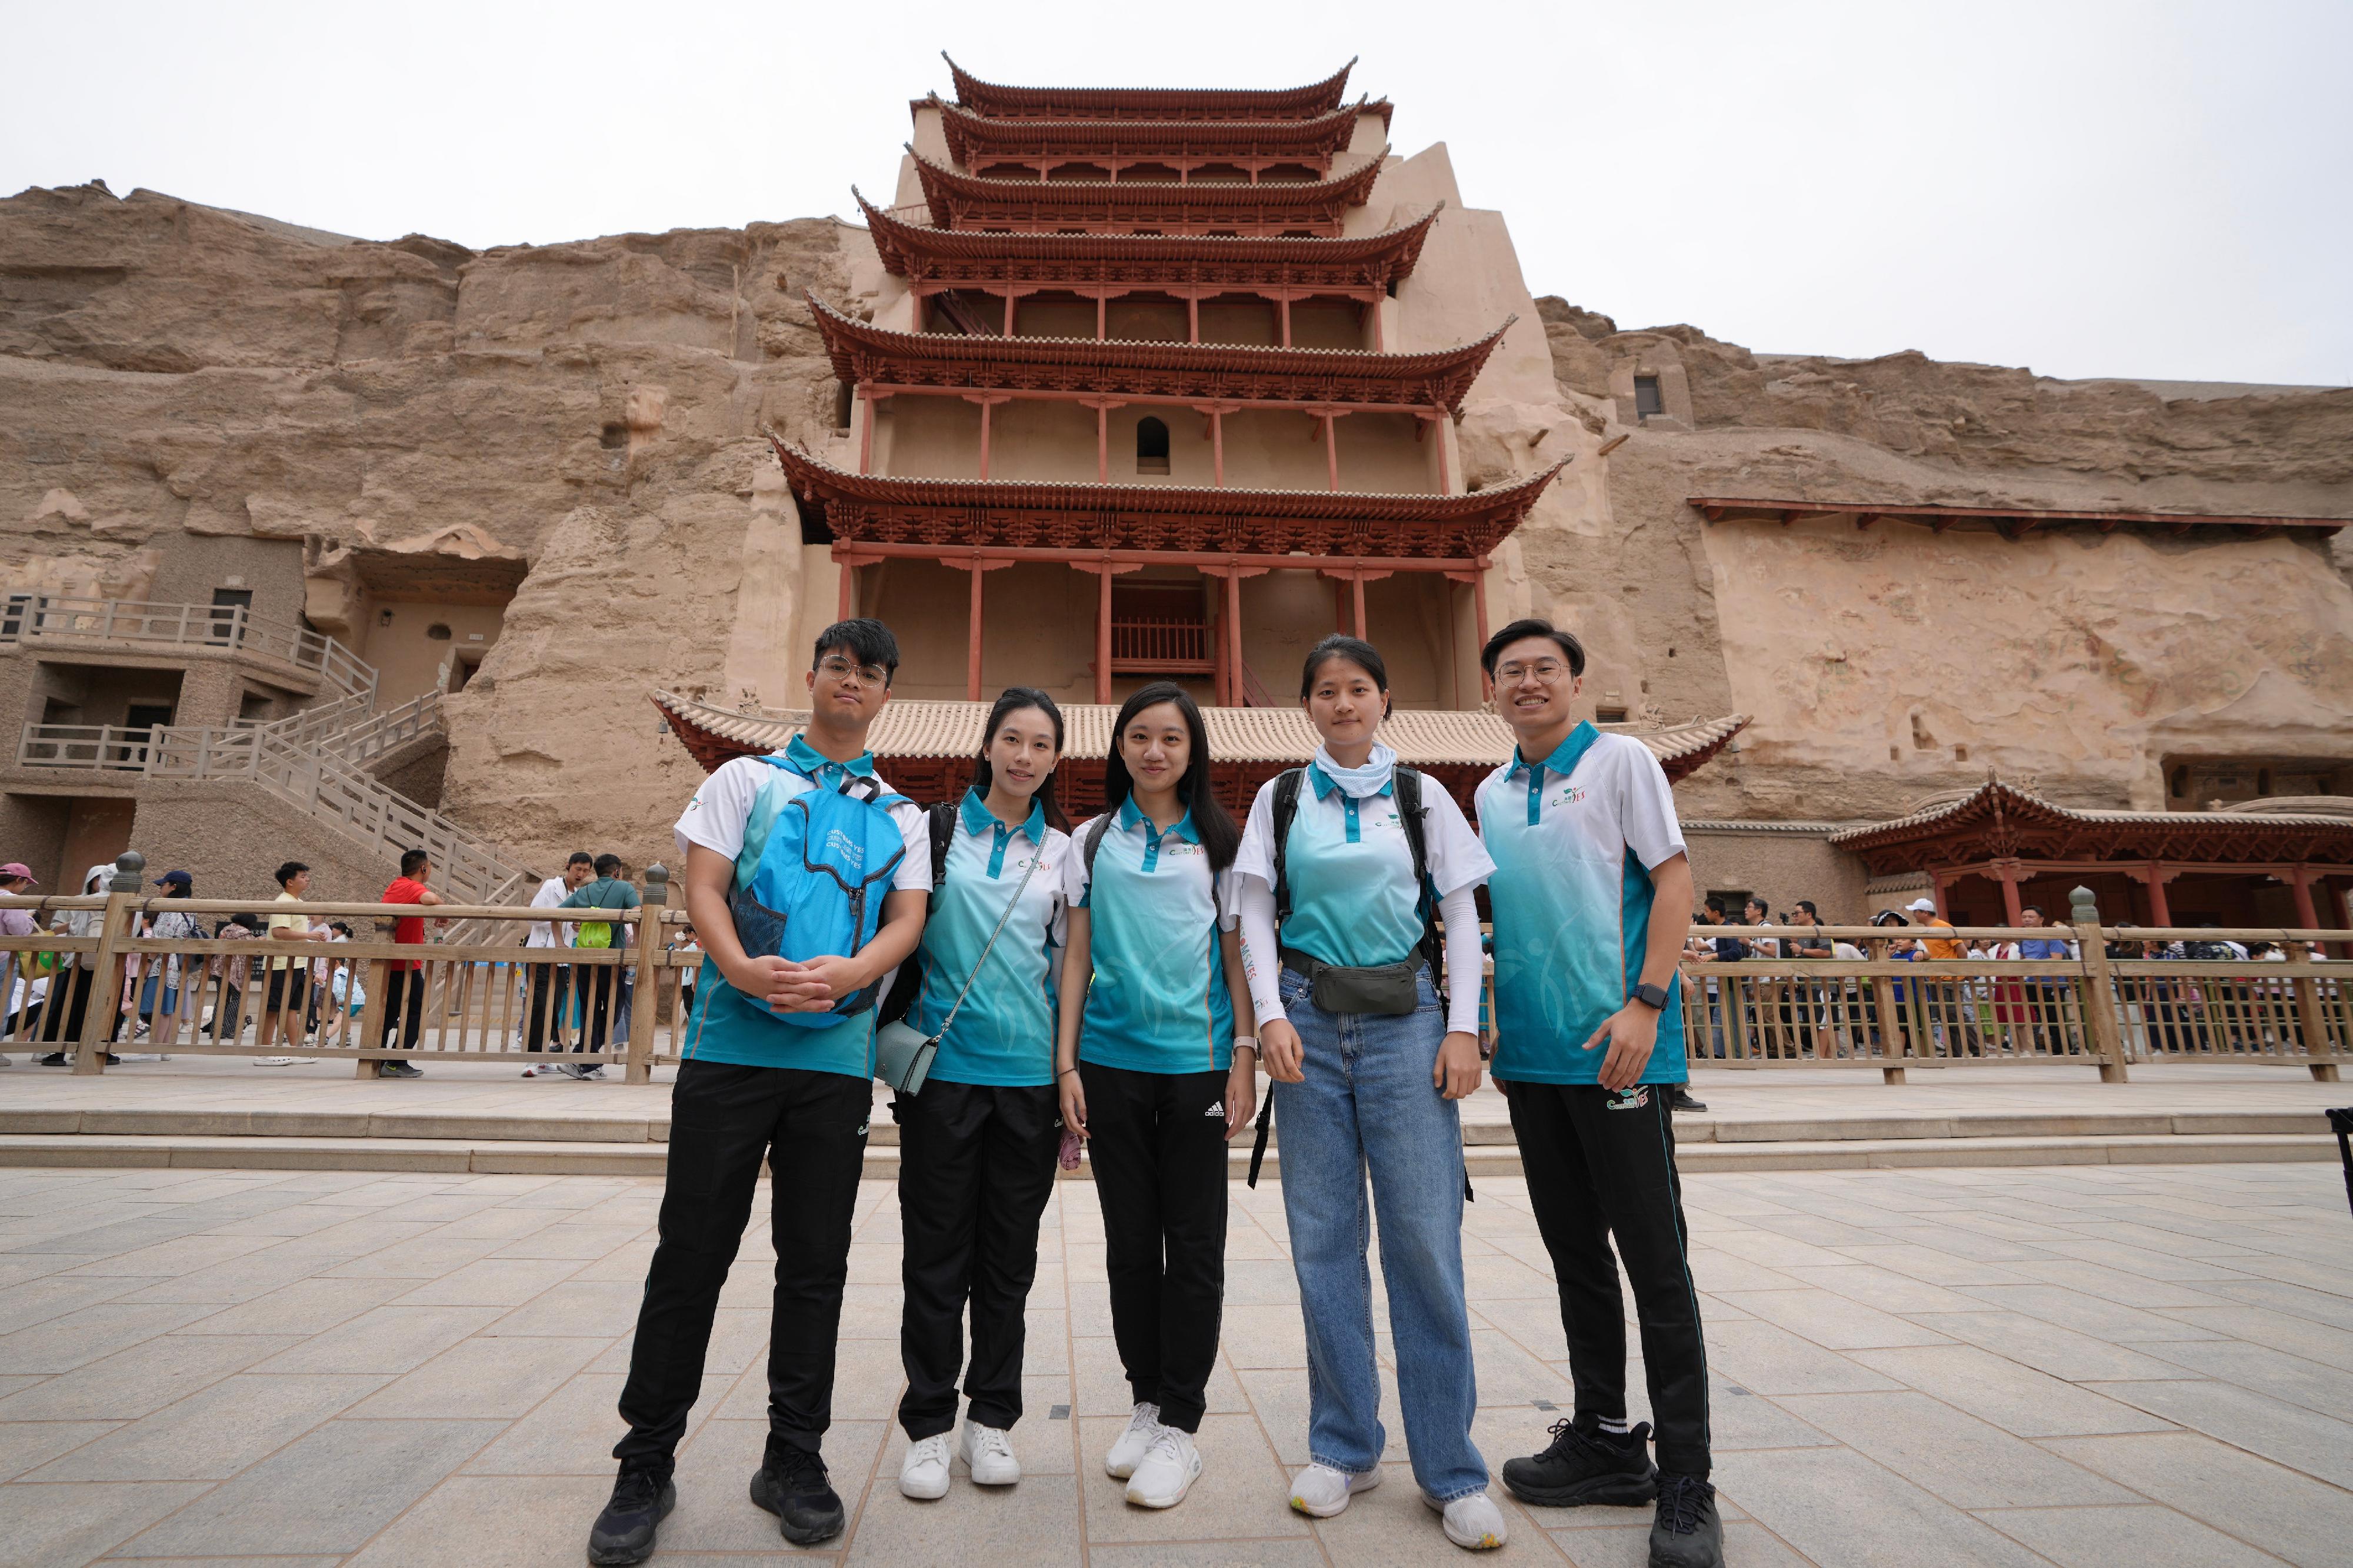 Members of “Customs YES” visited the Mogao Caves to appreciate the murals, sculptures and architecture inside on July 11.
